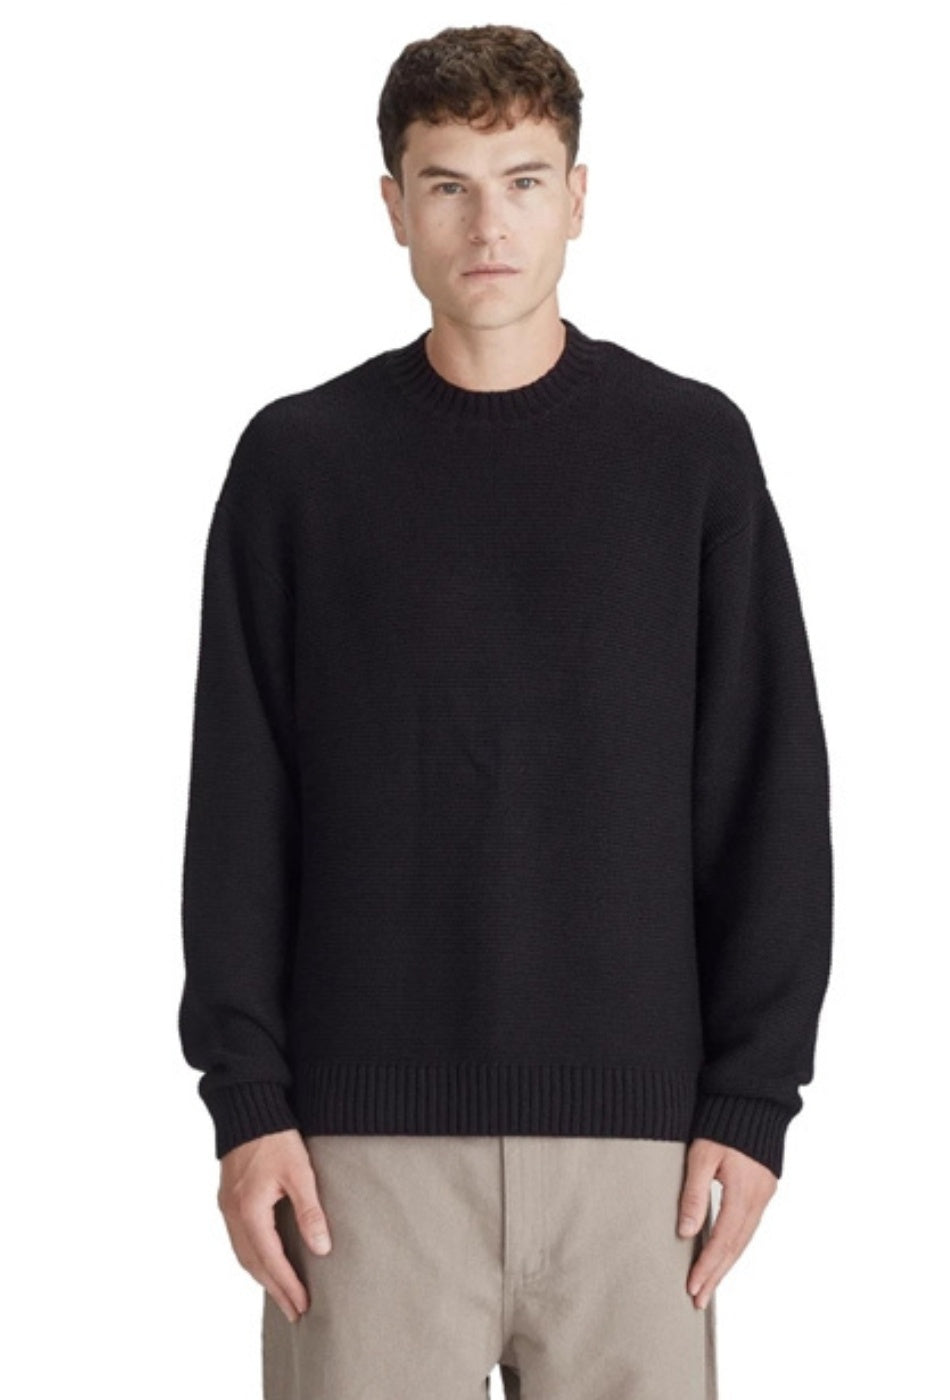 Mens Oversized Knit Jumper - Black-COMMONERS-P&K The General Store